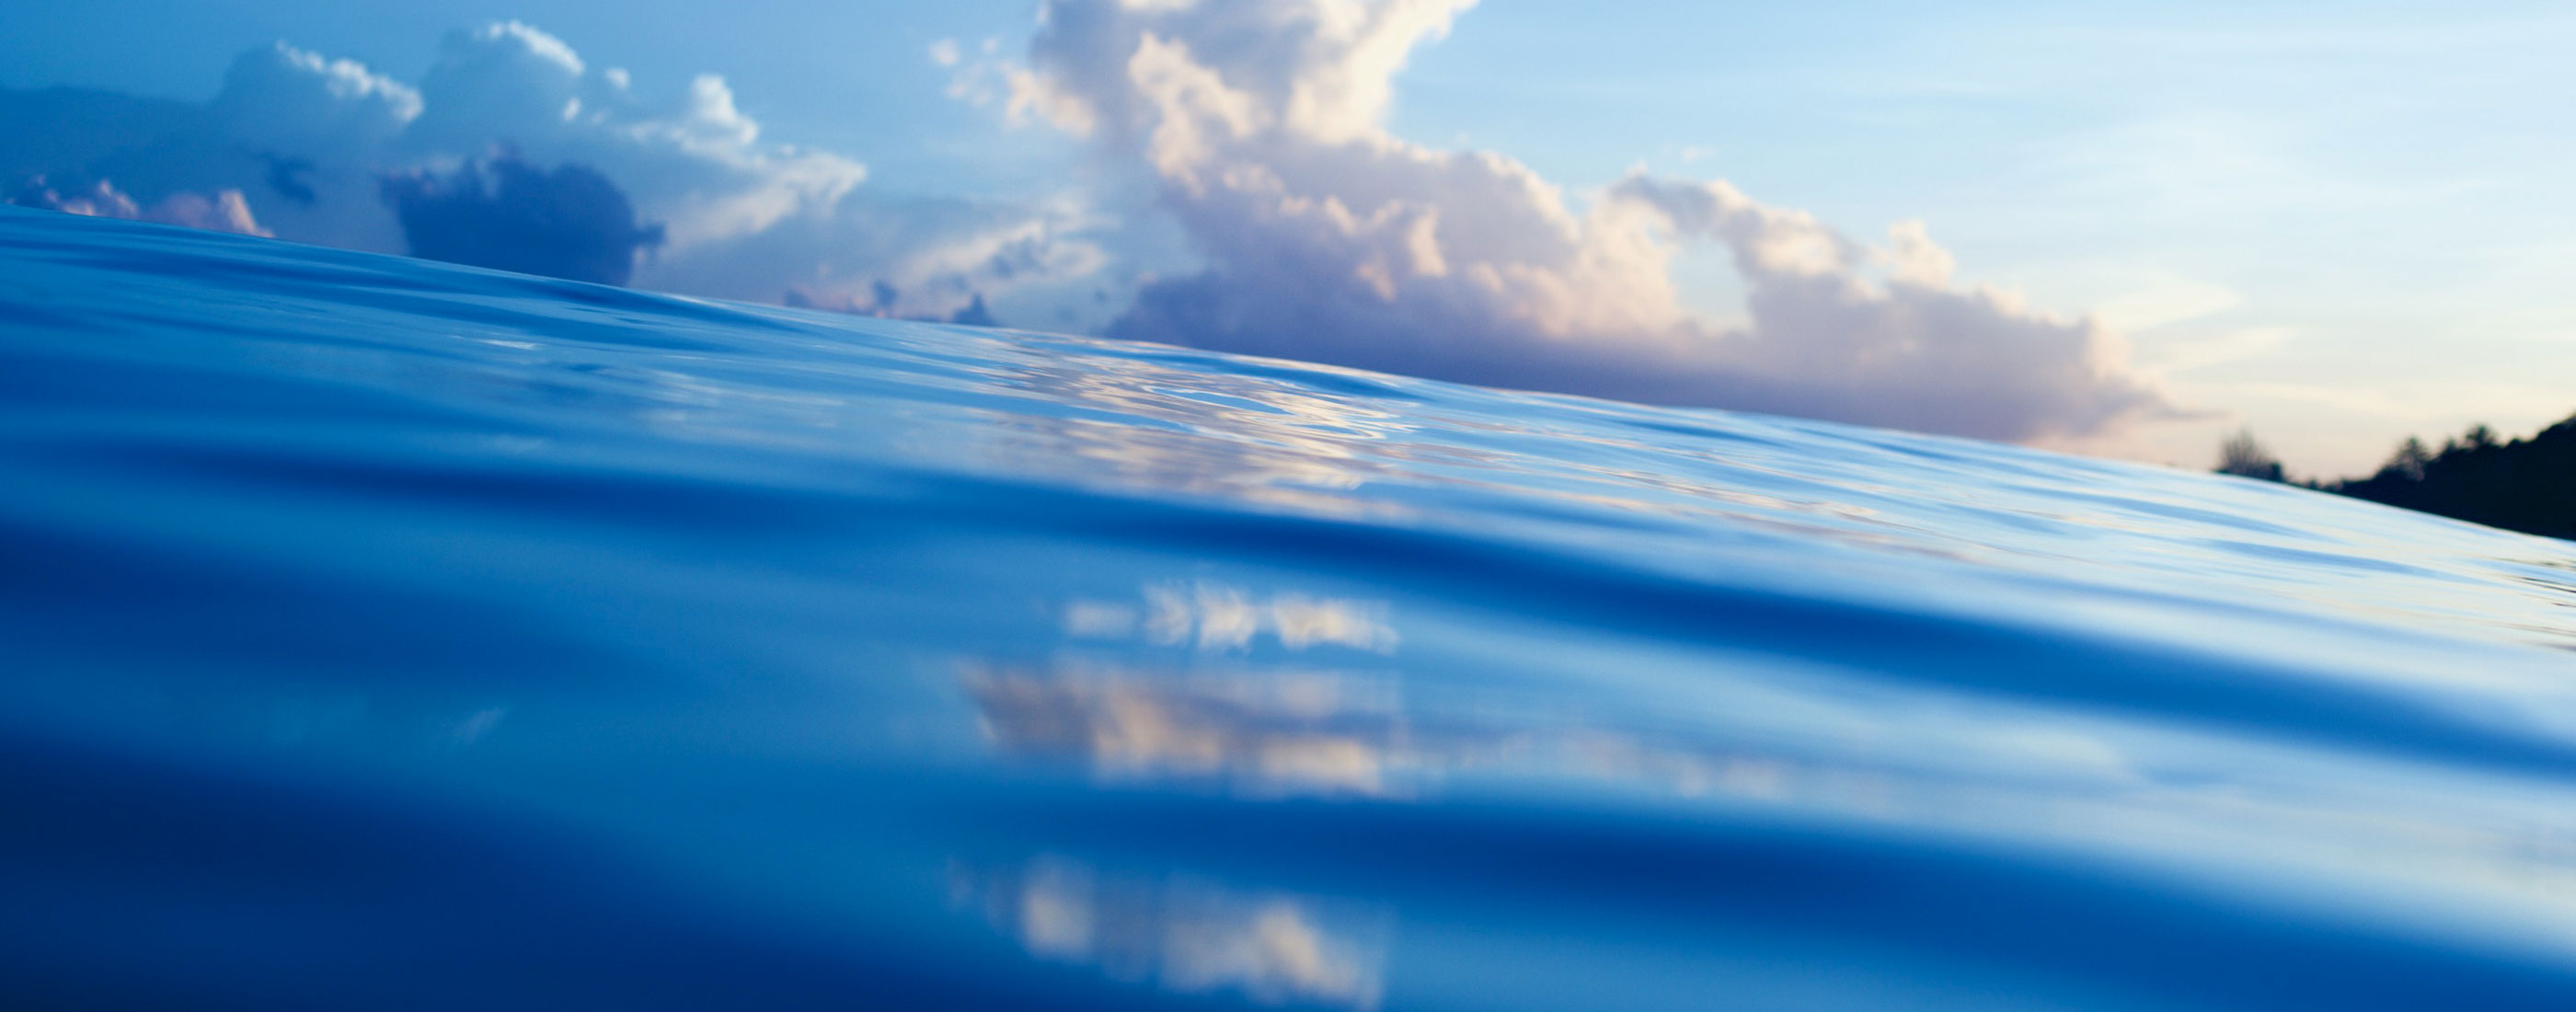 A closeup view of a large body of water with clouds and blue sky reflecting off the water